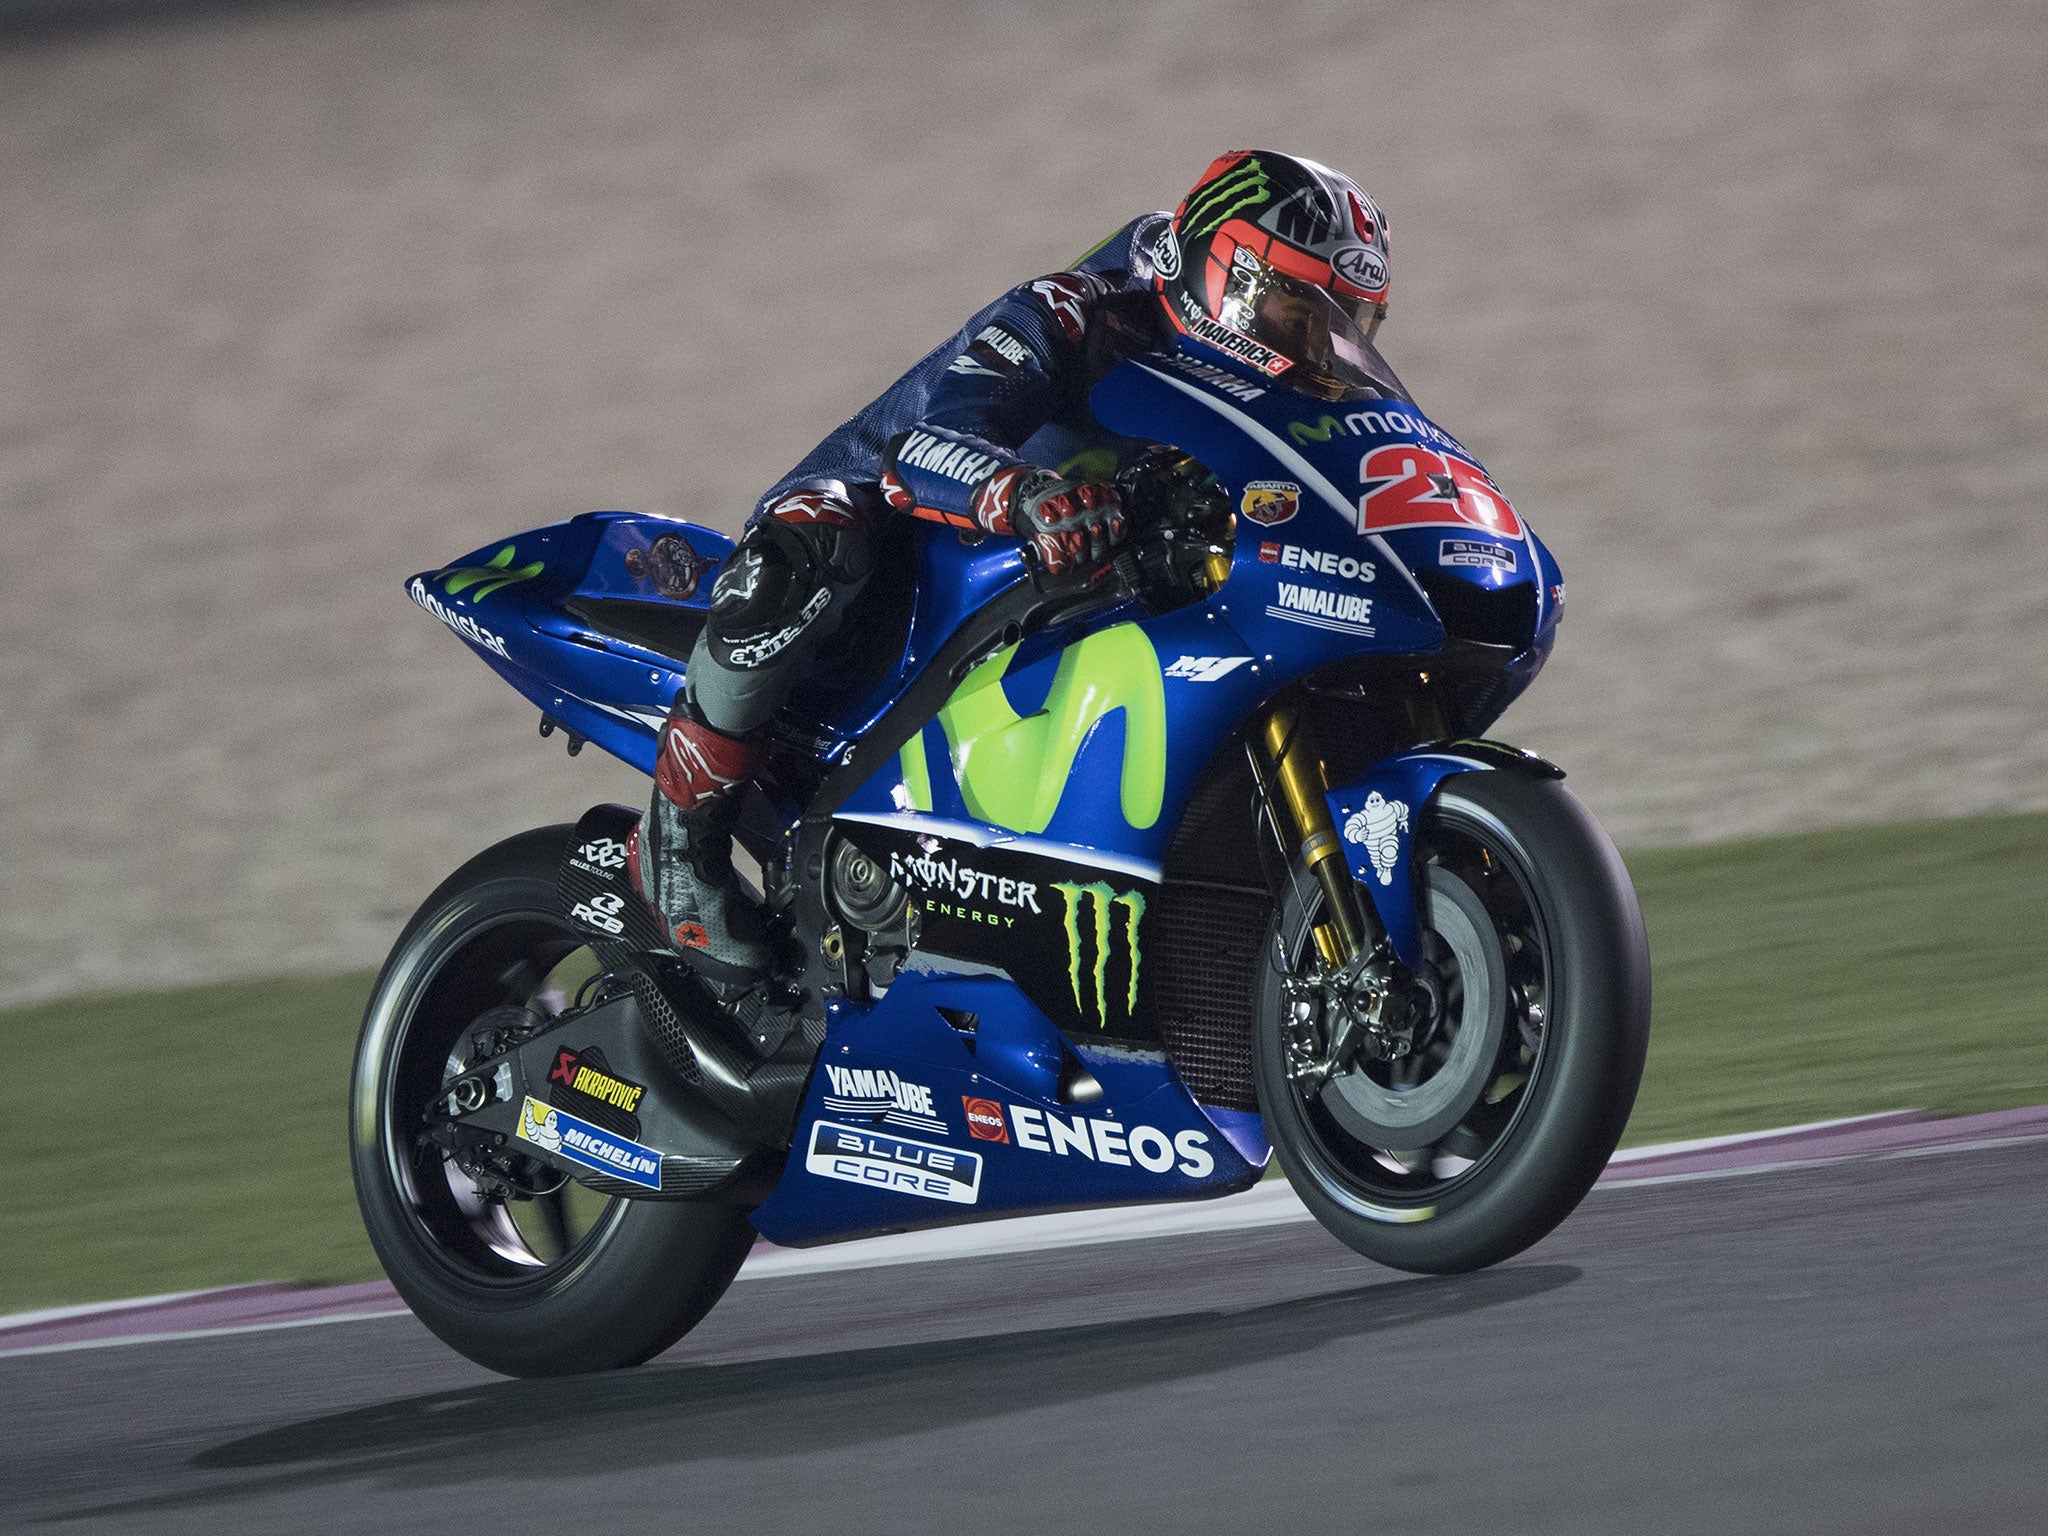 Vinales could prove the biggest rival to reigning champion Marquez